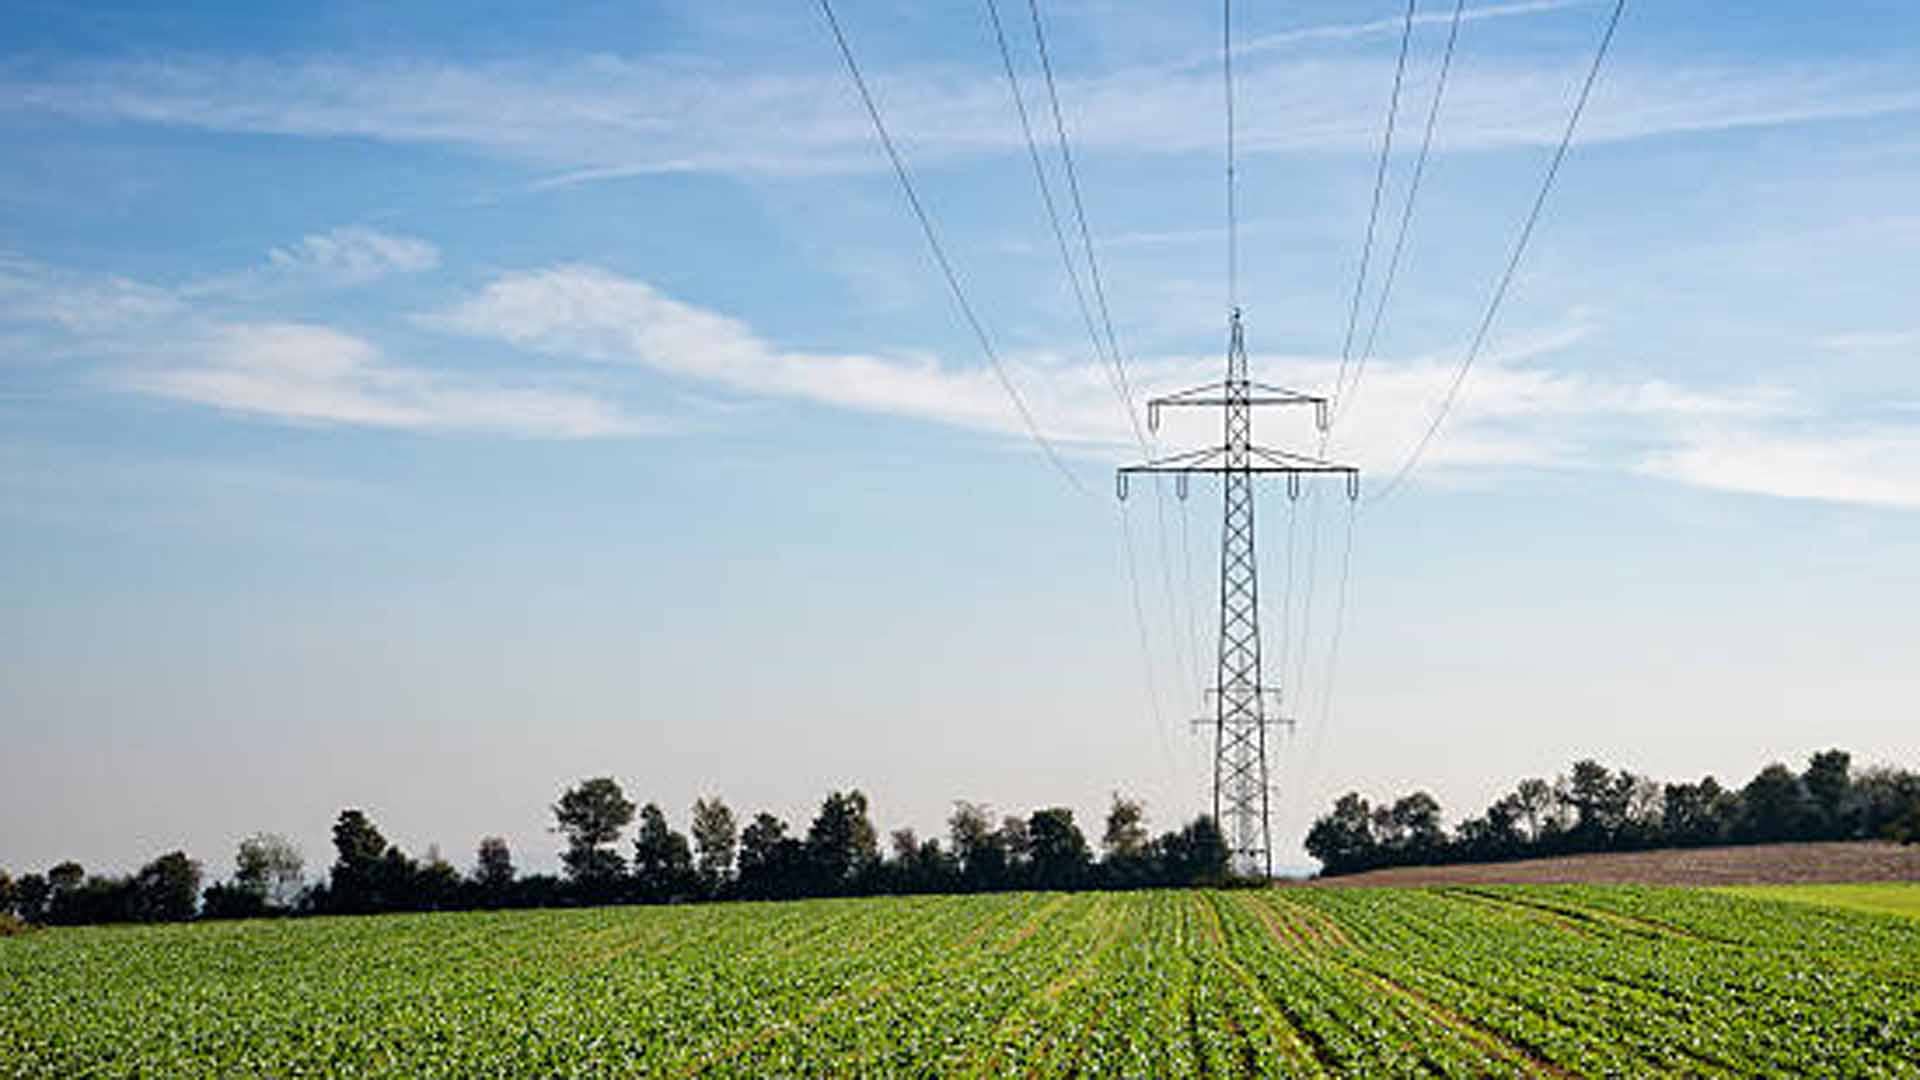 Transmission towers and power lines in agricultural fields.